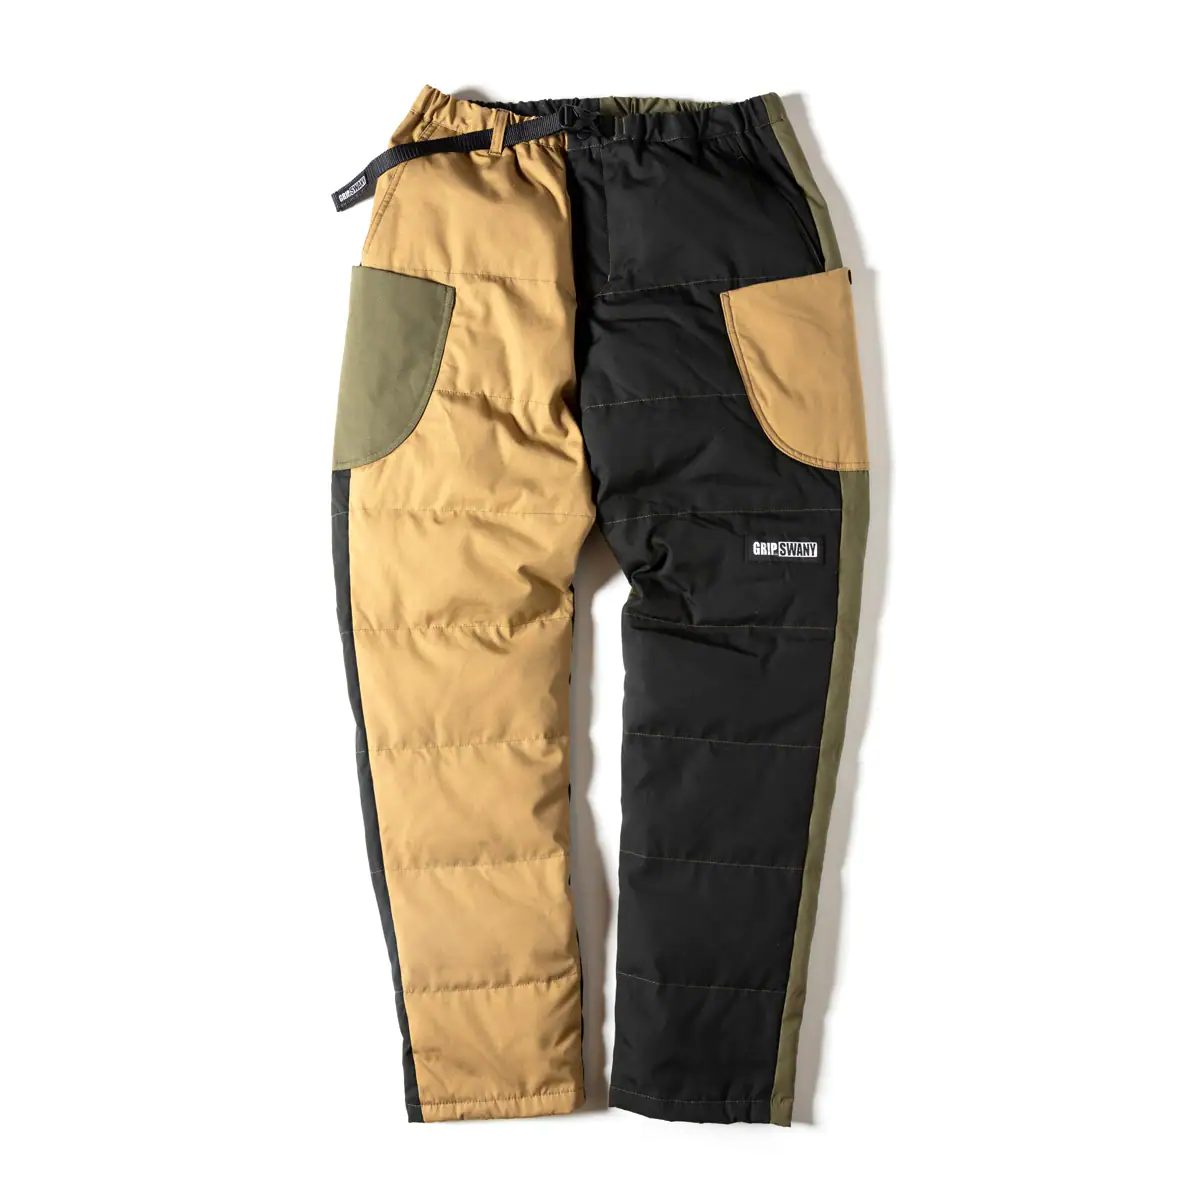 atmos x GRIPSWANY FIREPROOF DOWN PANTS